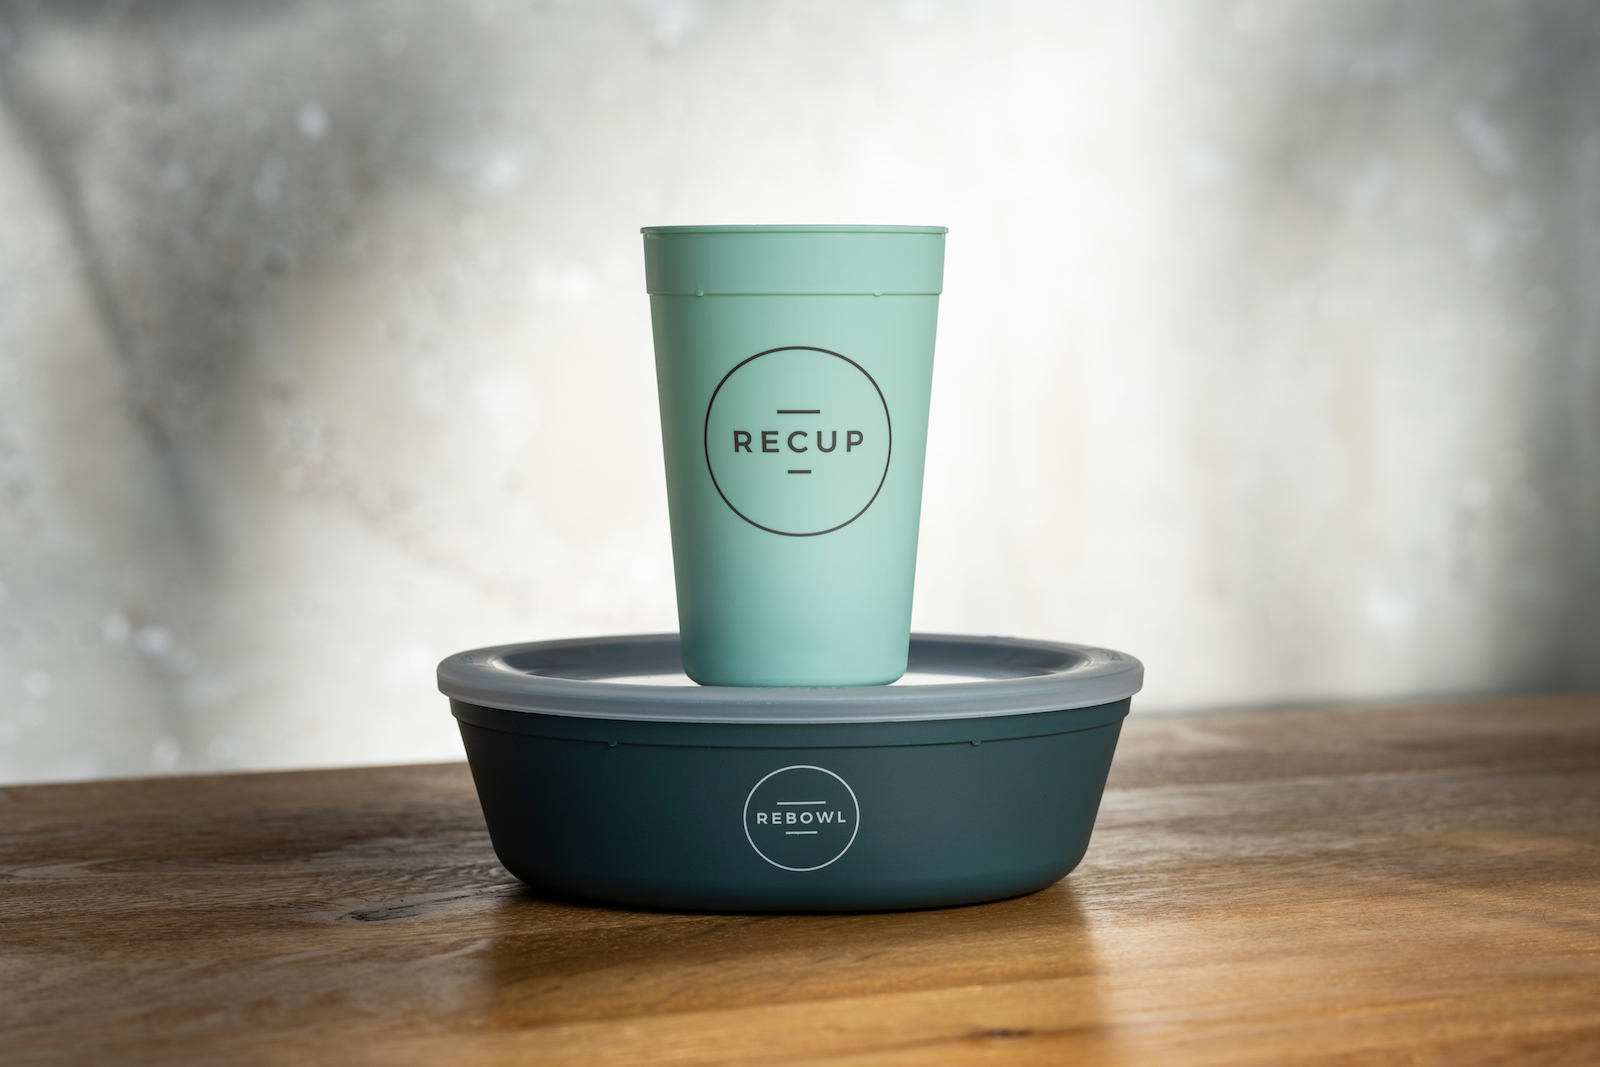 a green cup on top of a green bowl. Both are labeled ReCUP